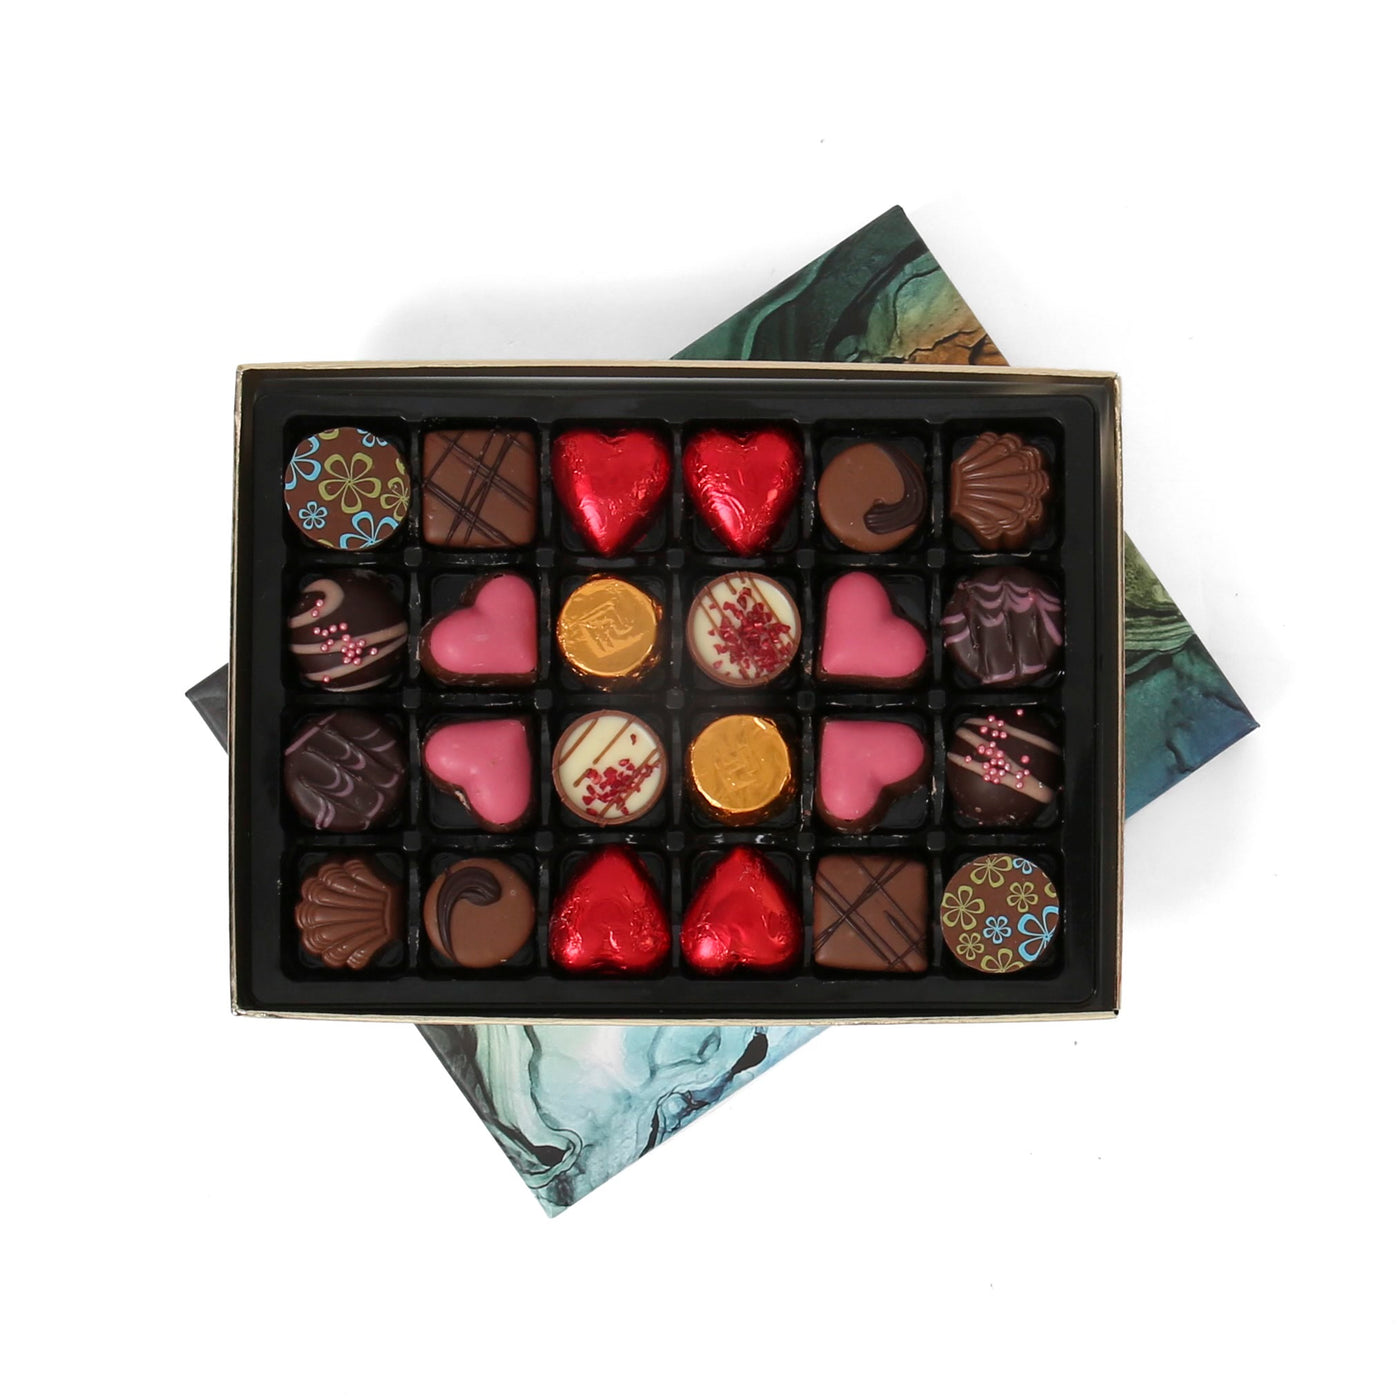 The One Cocoa London Ultimate Love Bundle